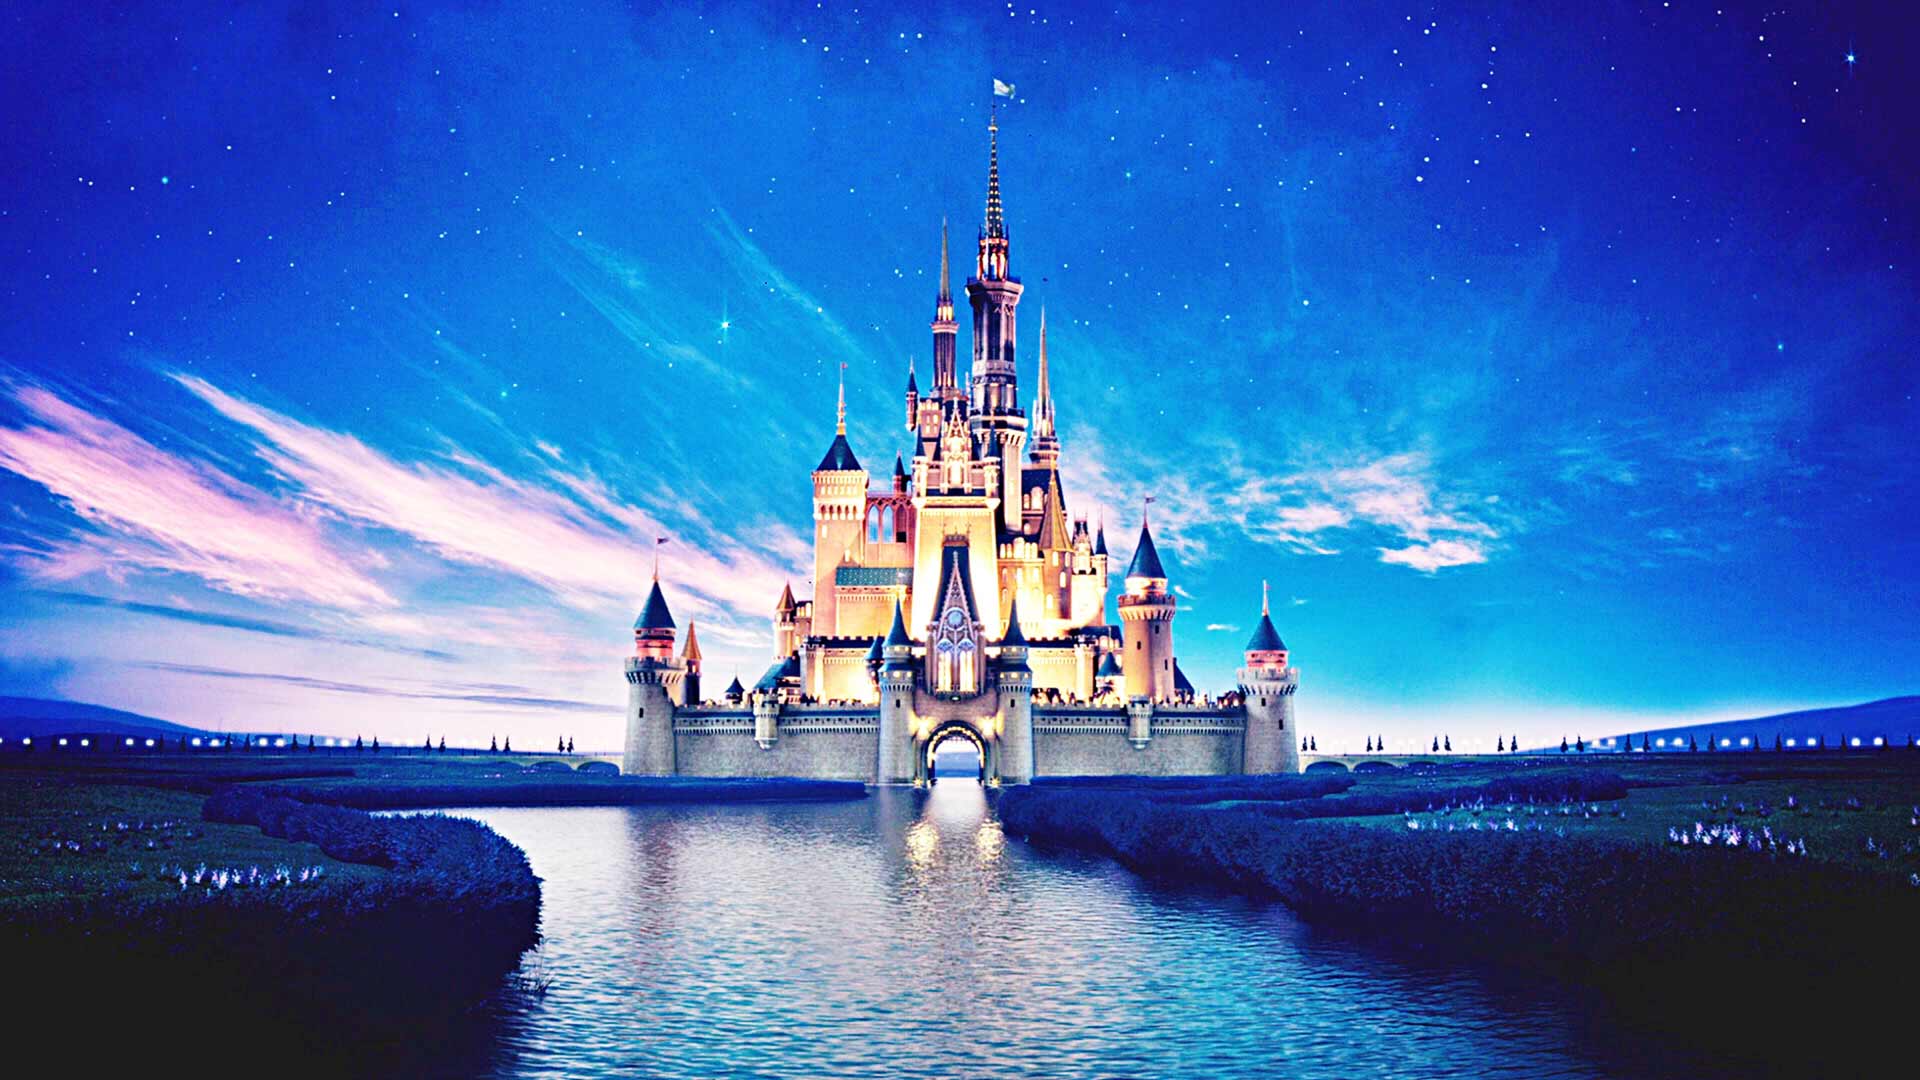 Castle Wallpaper Widescreen Pictures In High Definition Or